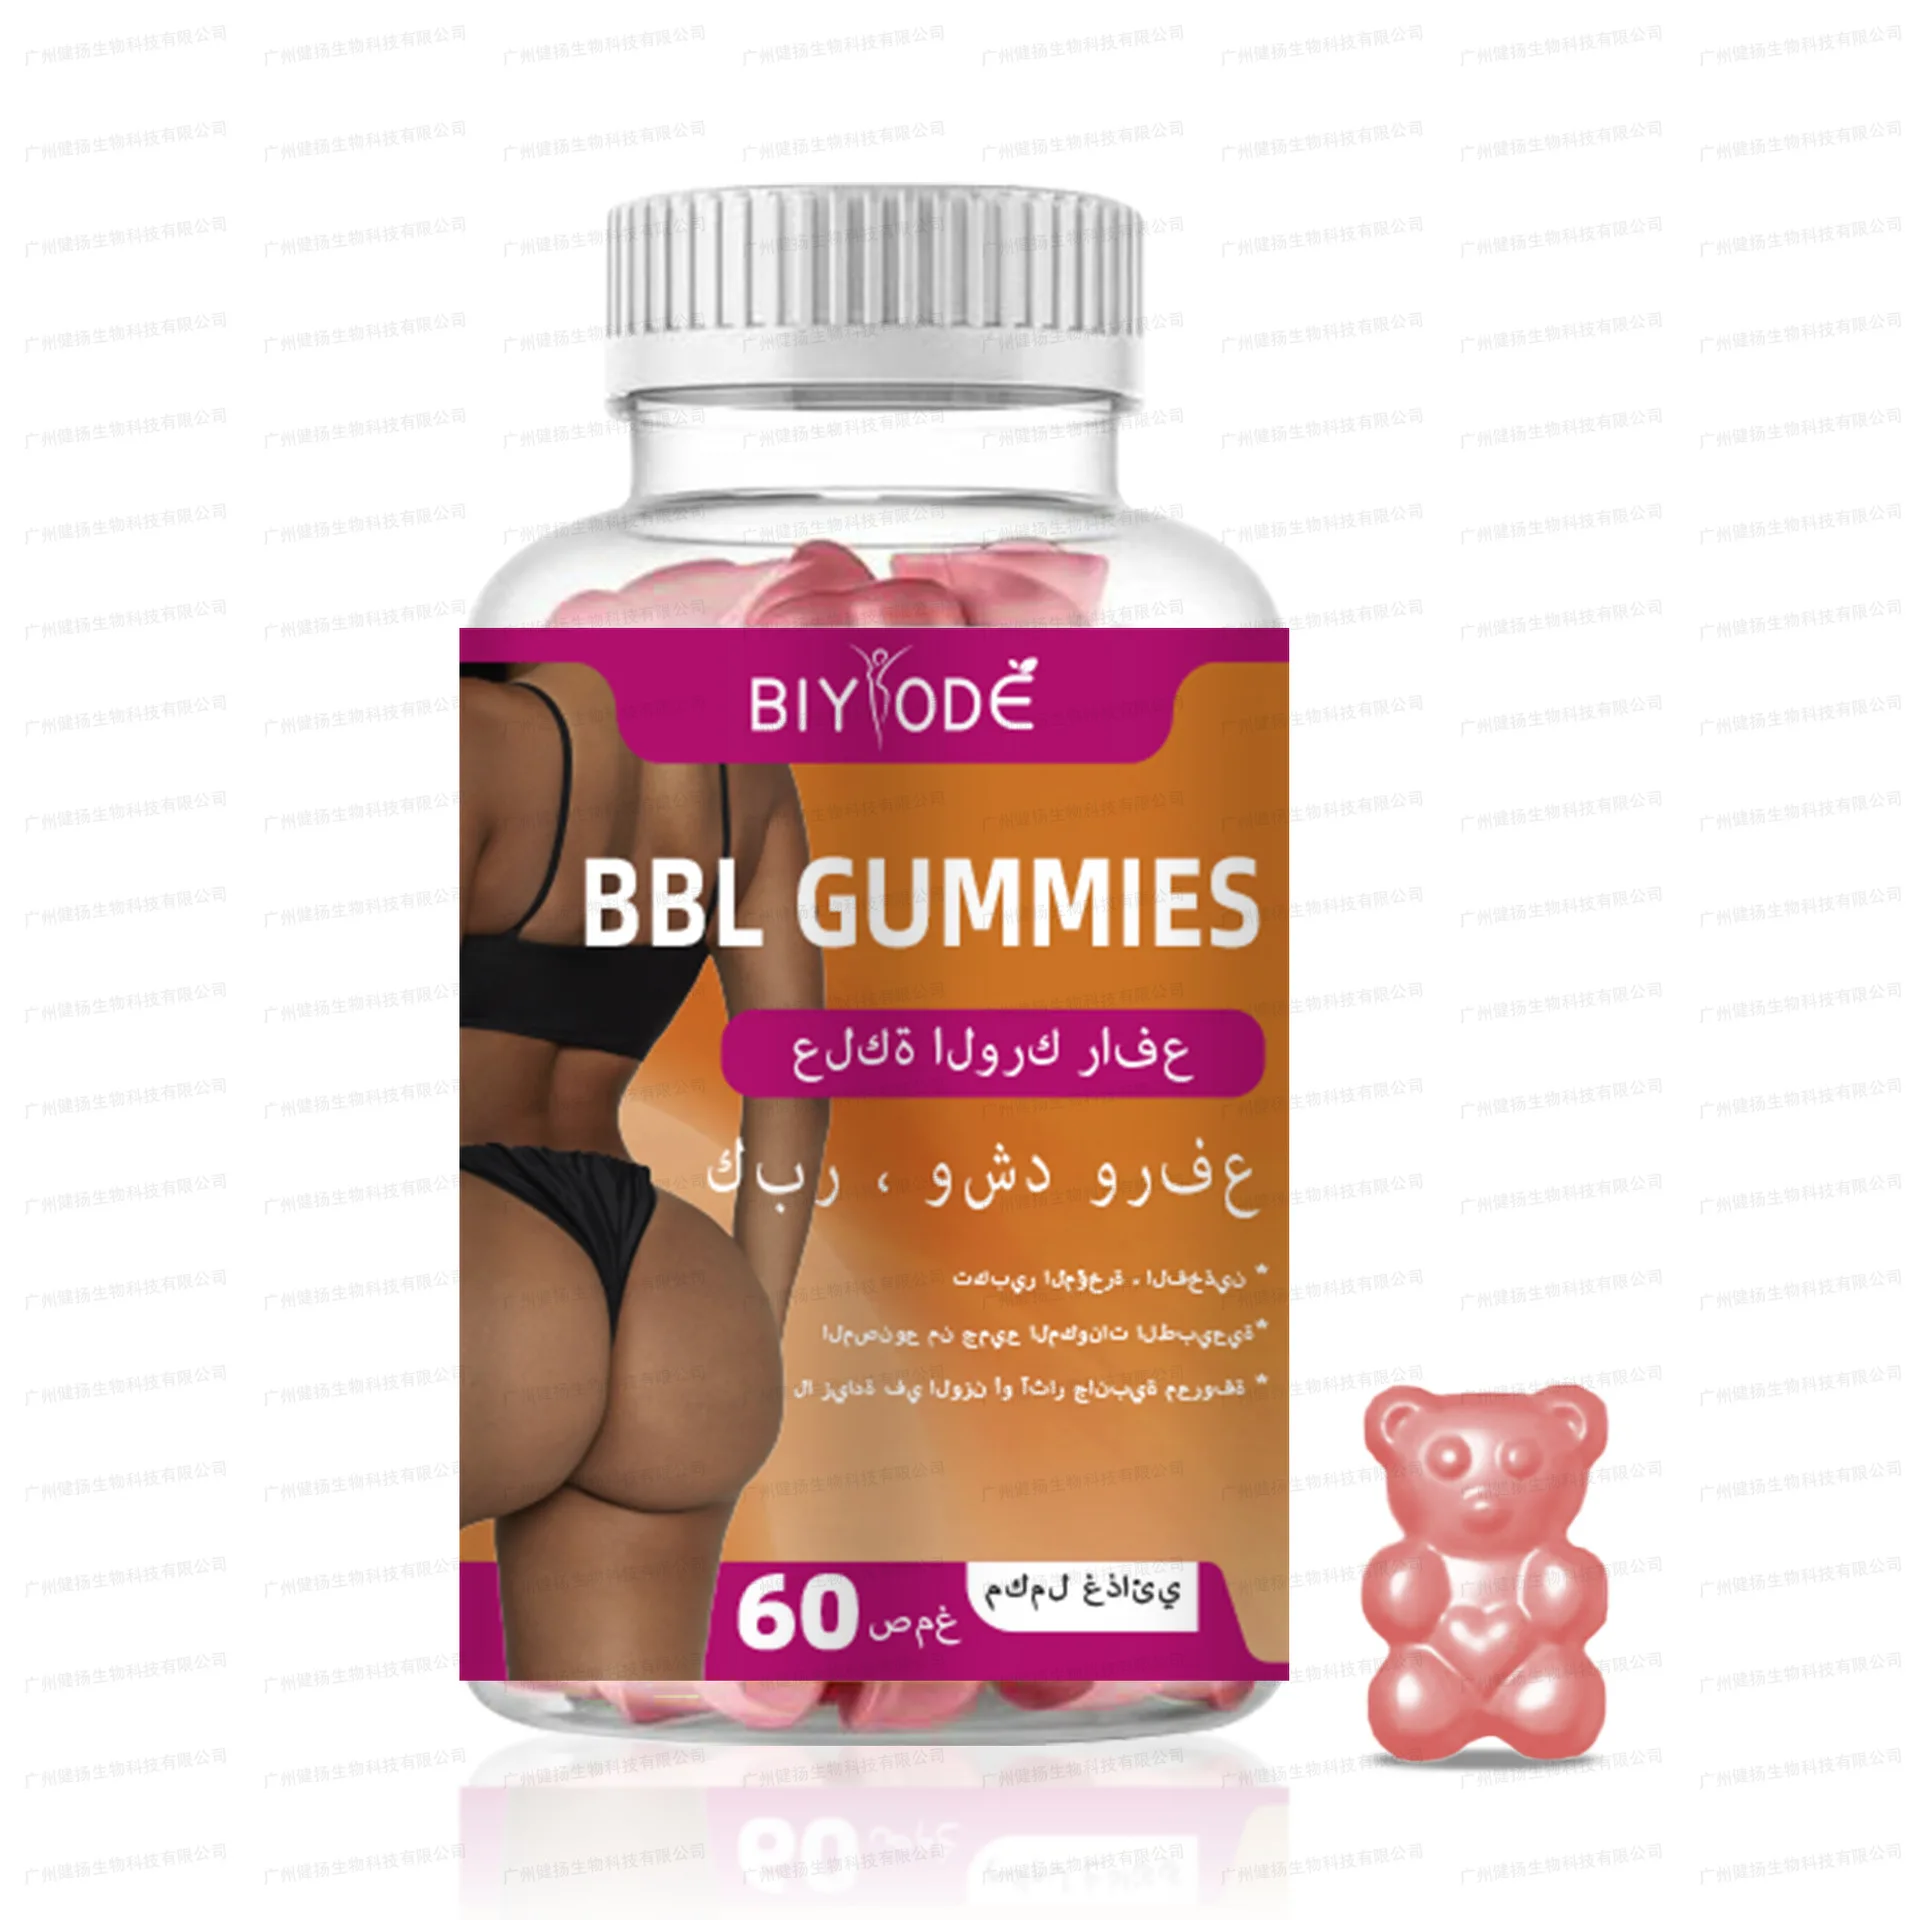 

1 bottle butt gummy makes buttocks bigger more curved fuller more confident supporting hormone balance antioxidant activity